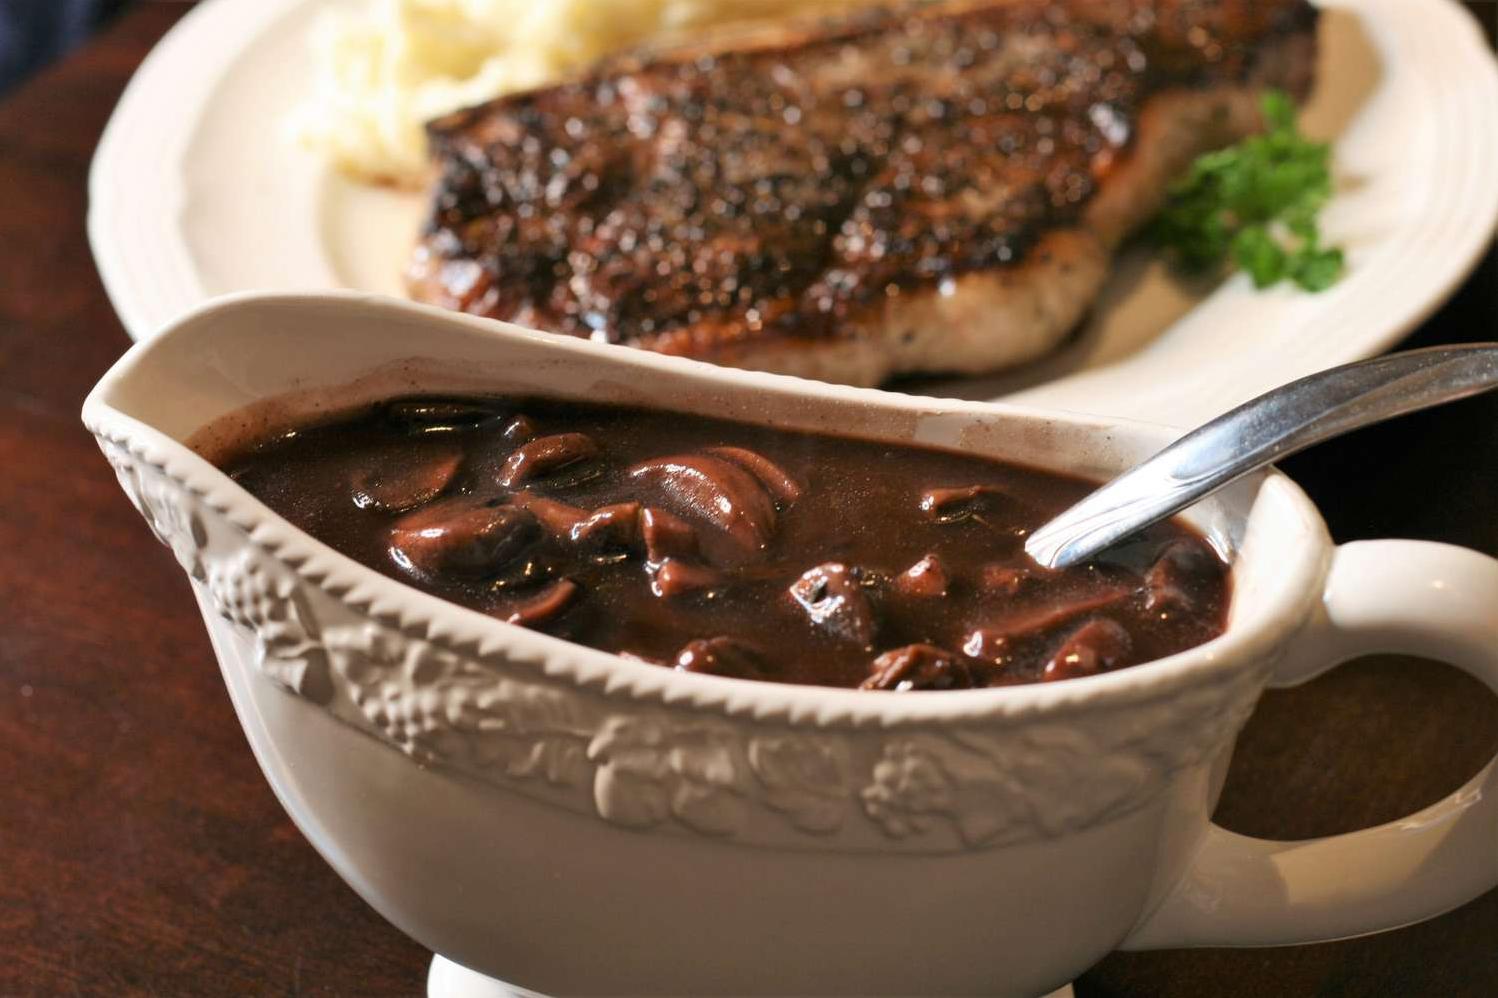  Pour yourself a glass of red wine and indulge in this steak with red wine and mushroom reduction recipe!